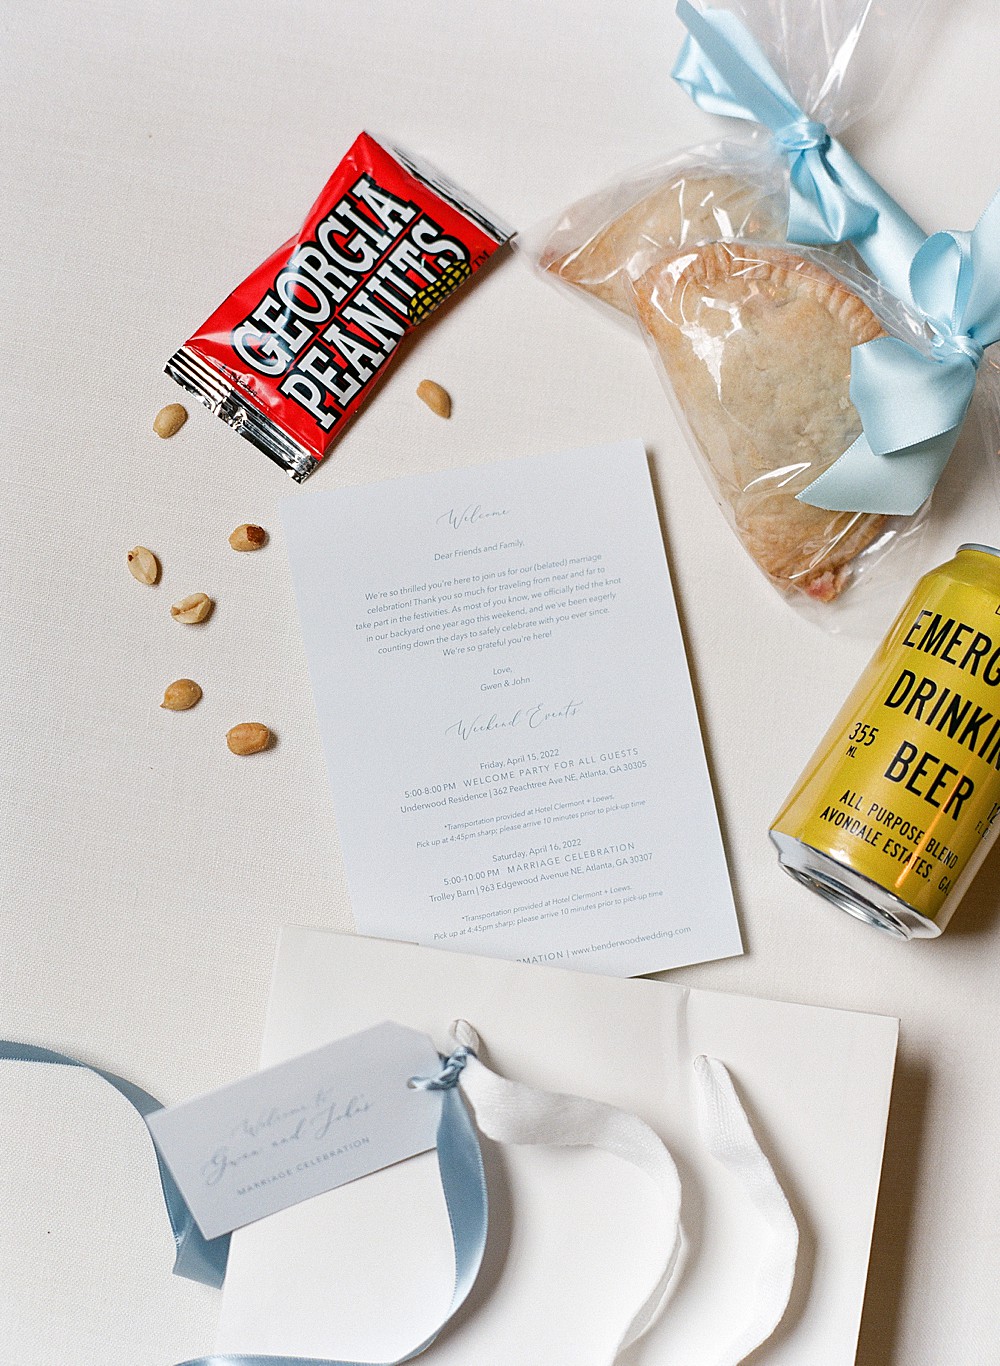 Wedding welcome bag with peanuts and Emergency Drinking Beer